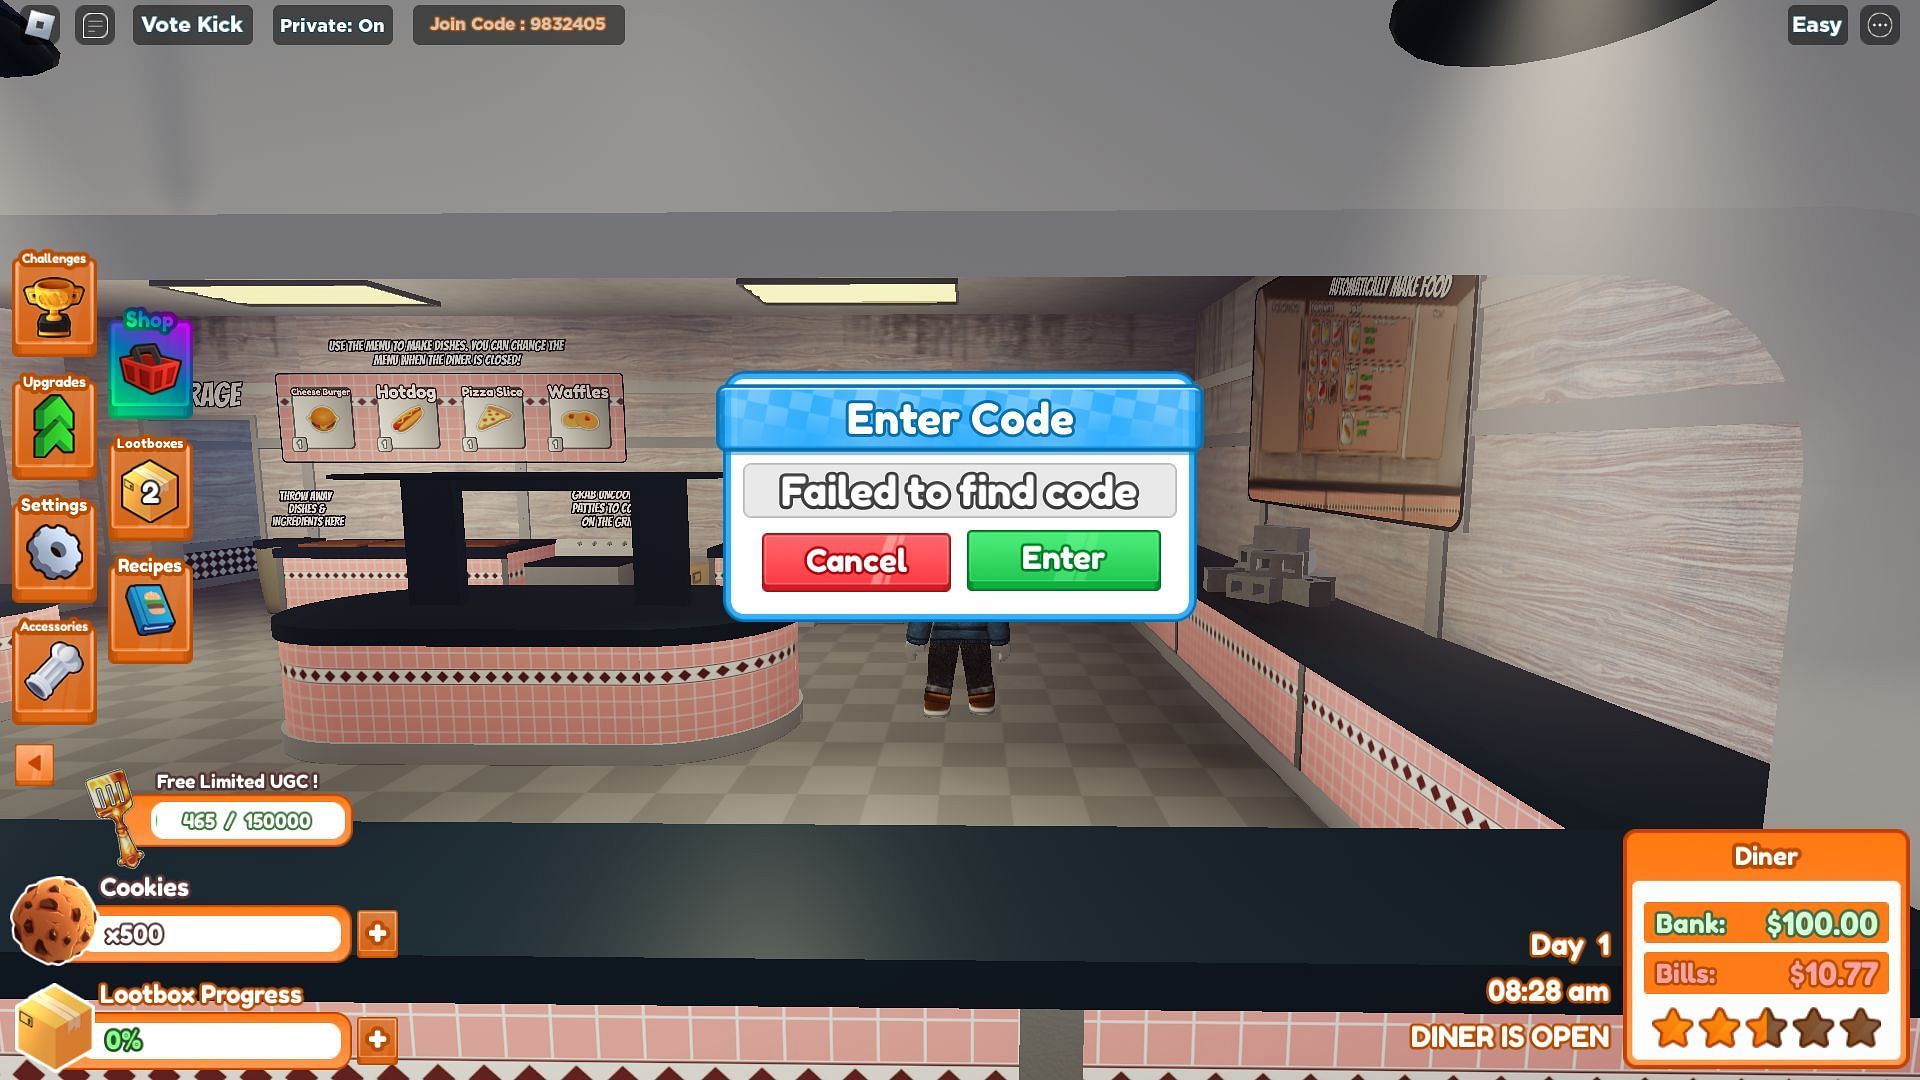 Troubleshooting codes for Diner Simulator (Image via Roblox)